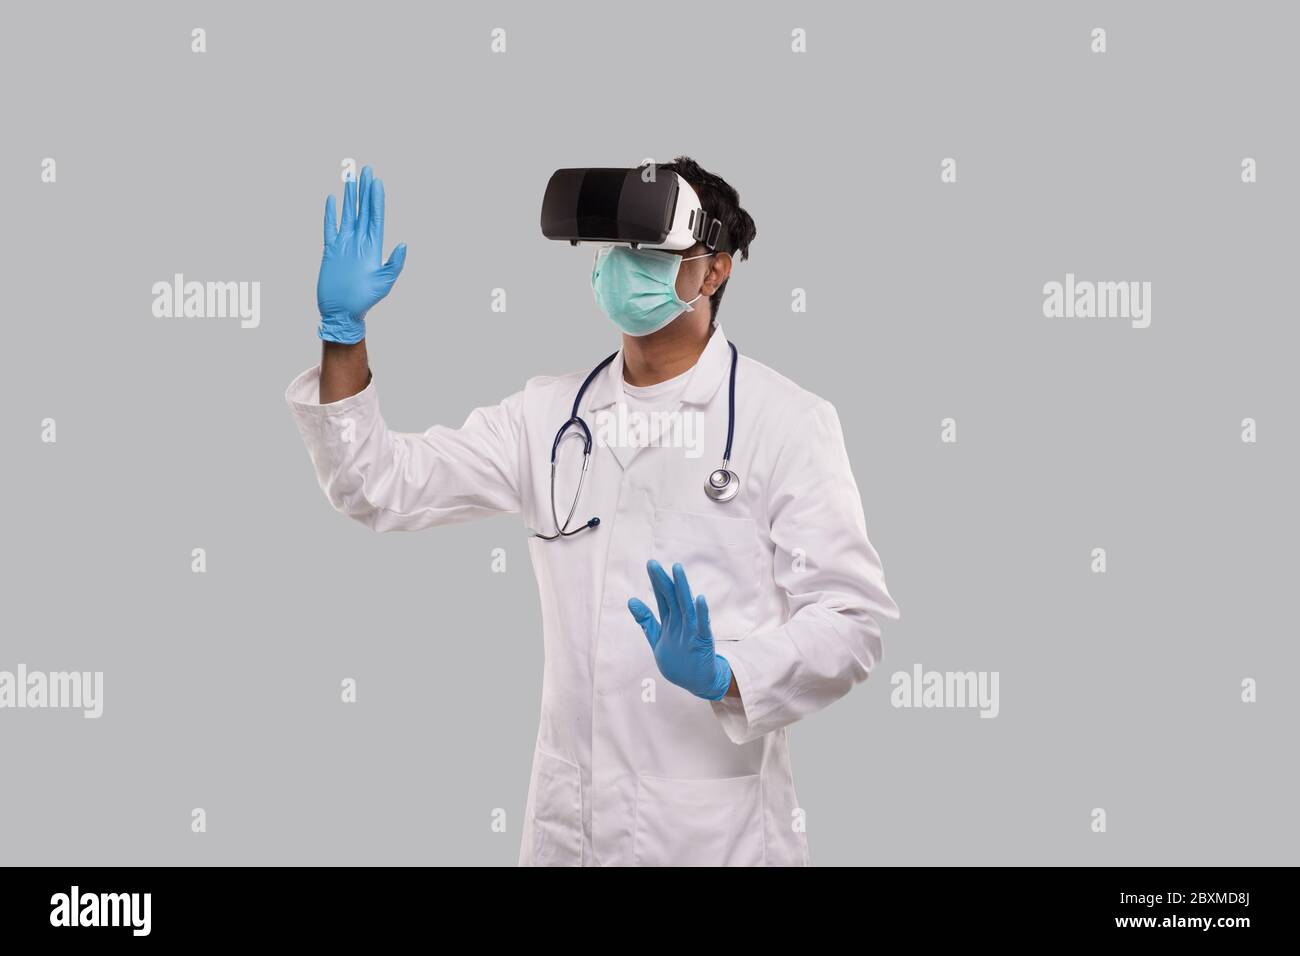 Doctor Wearing VR Glasses, Medical Mask and Gloves Hands to Sides Isolated. Indian Man Doctor Pointing in Virtual Reality Stock Photo